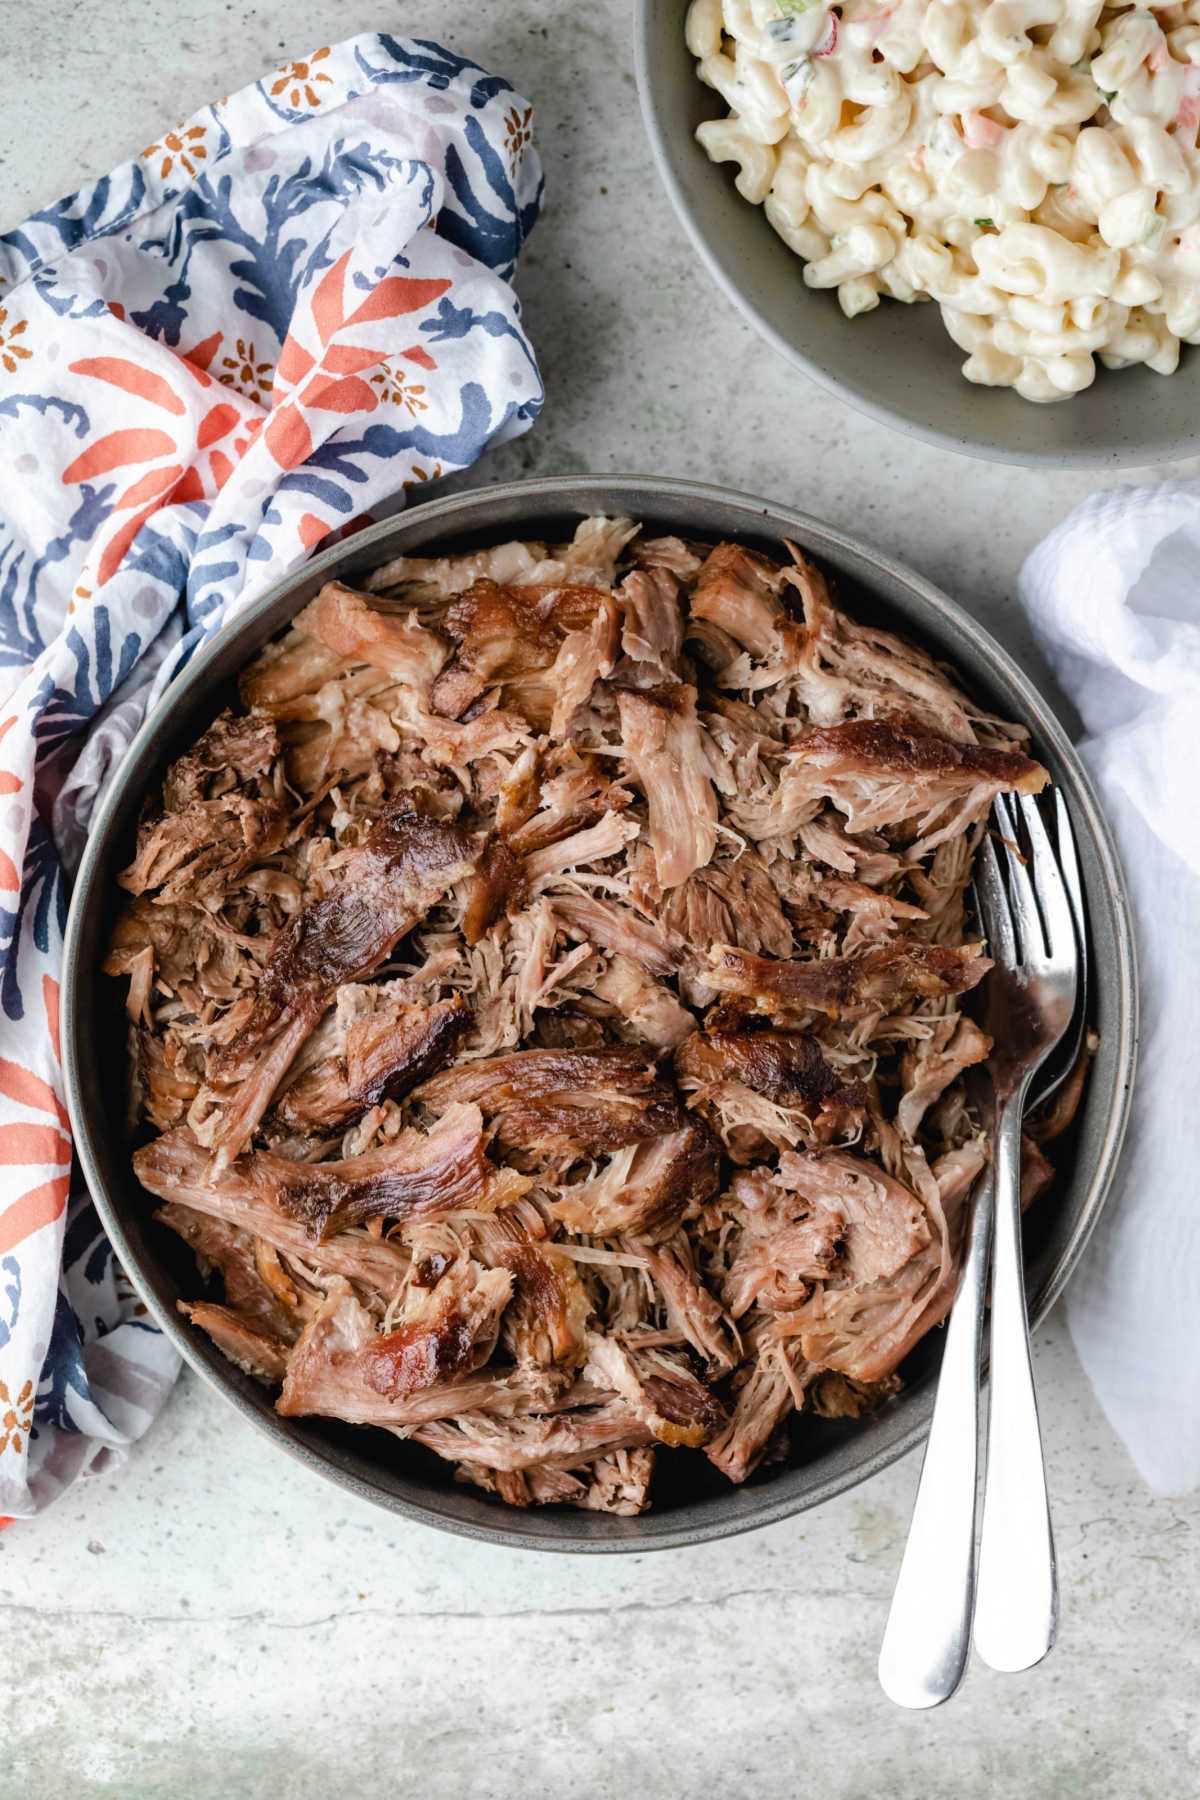 Slow cooker kalua pork in a gray bowl with forks and multicolored napkins in background.